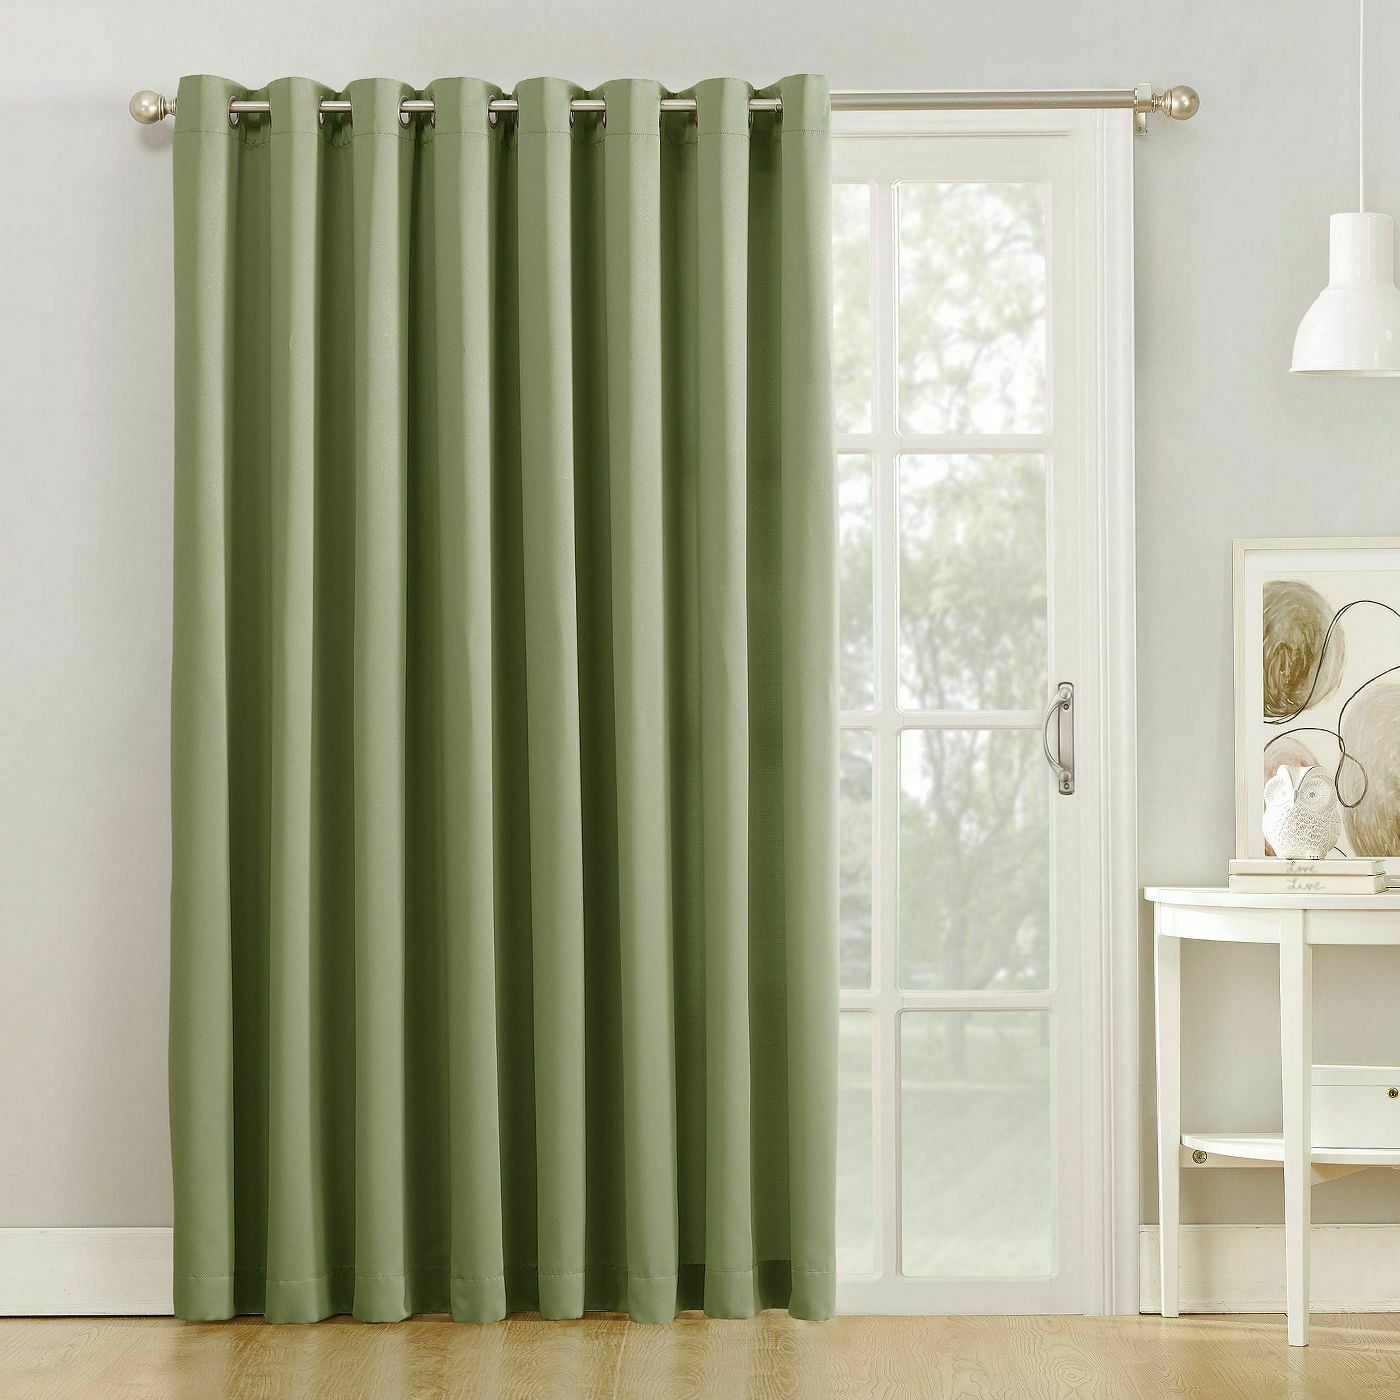 Grommets Panels 100% Blackout 3 Layered Bay Window Curtain 1 Set LIME GREEN 84" 